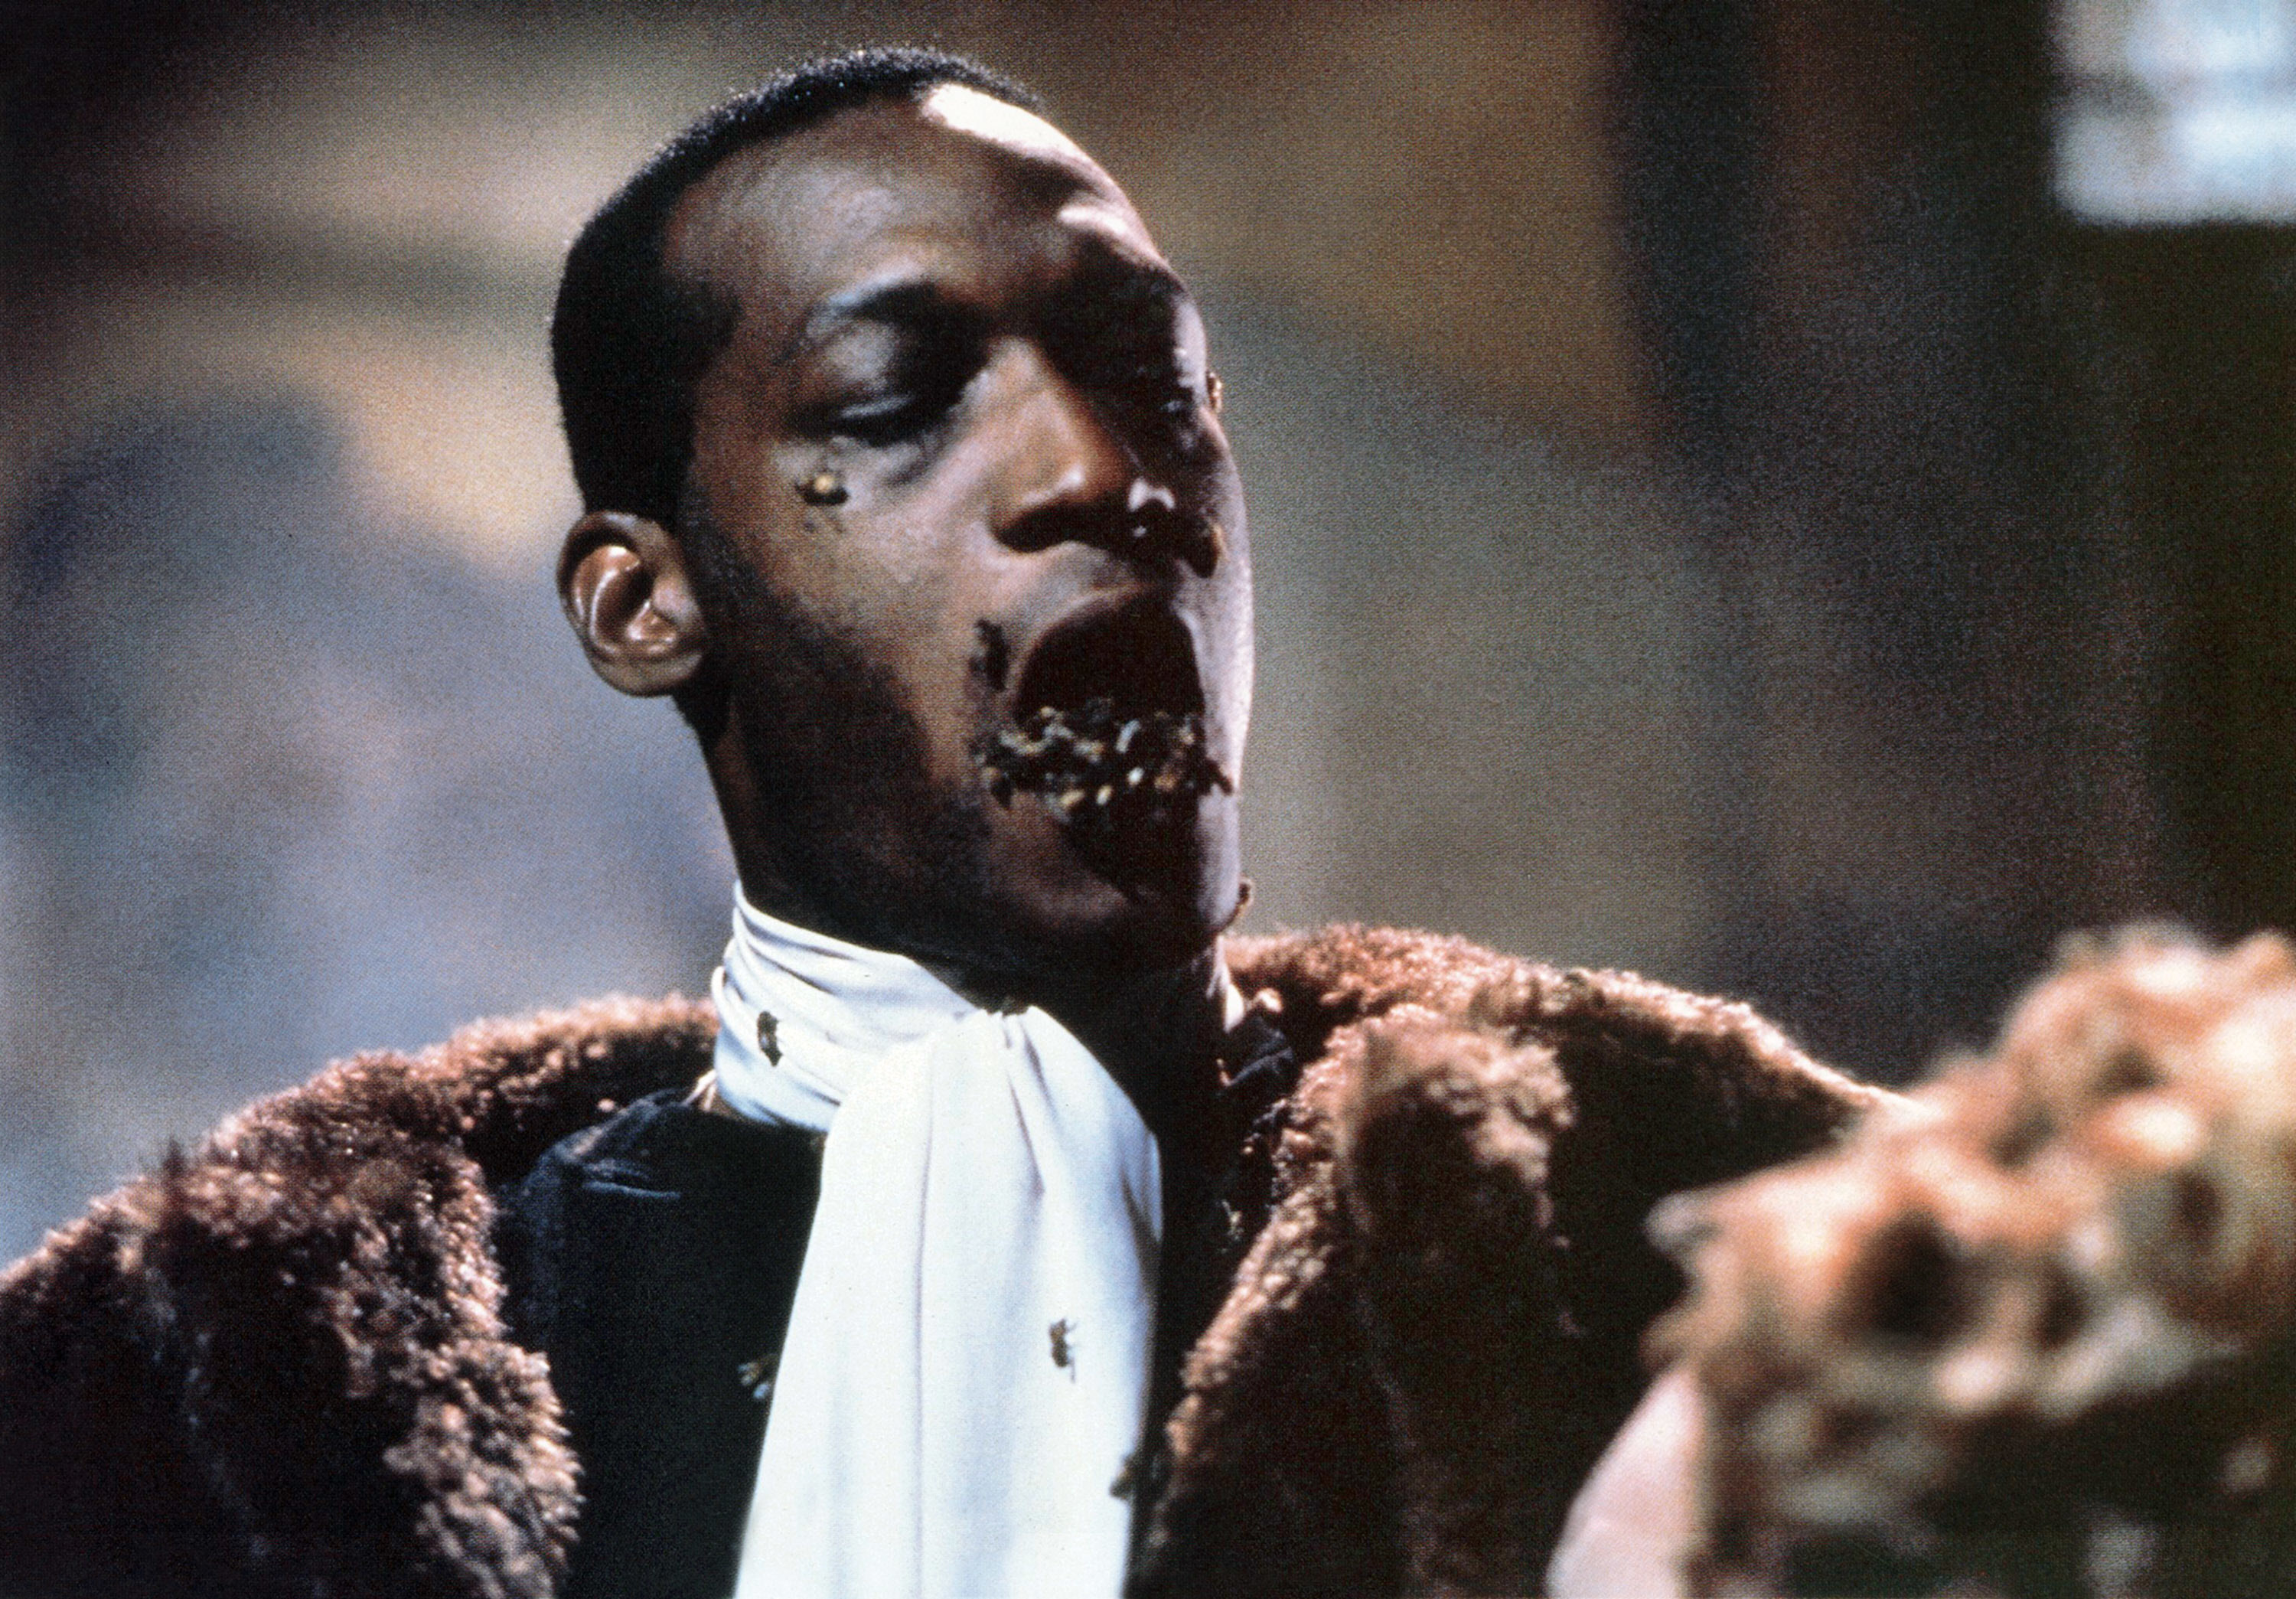 Tony Todd as Candyman, bees flying out of his mouth